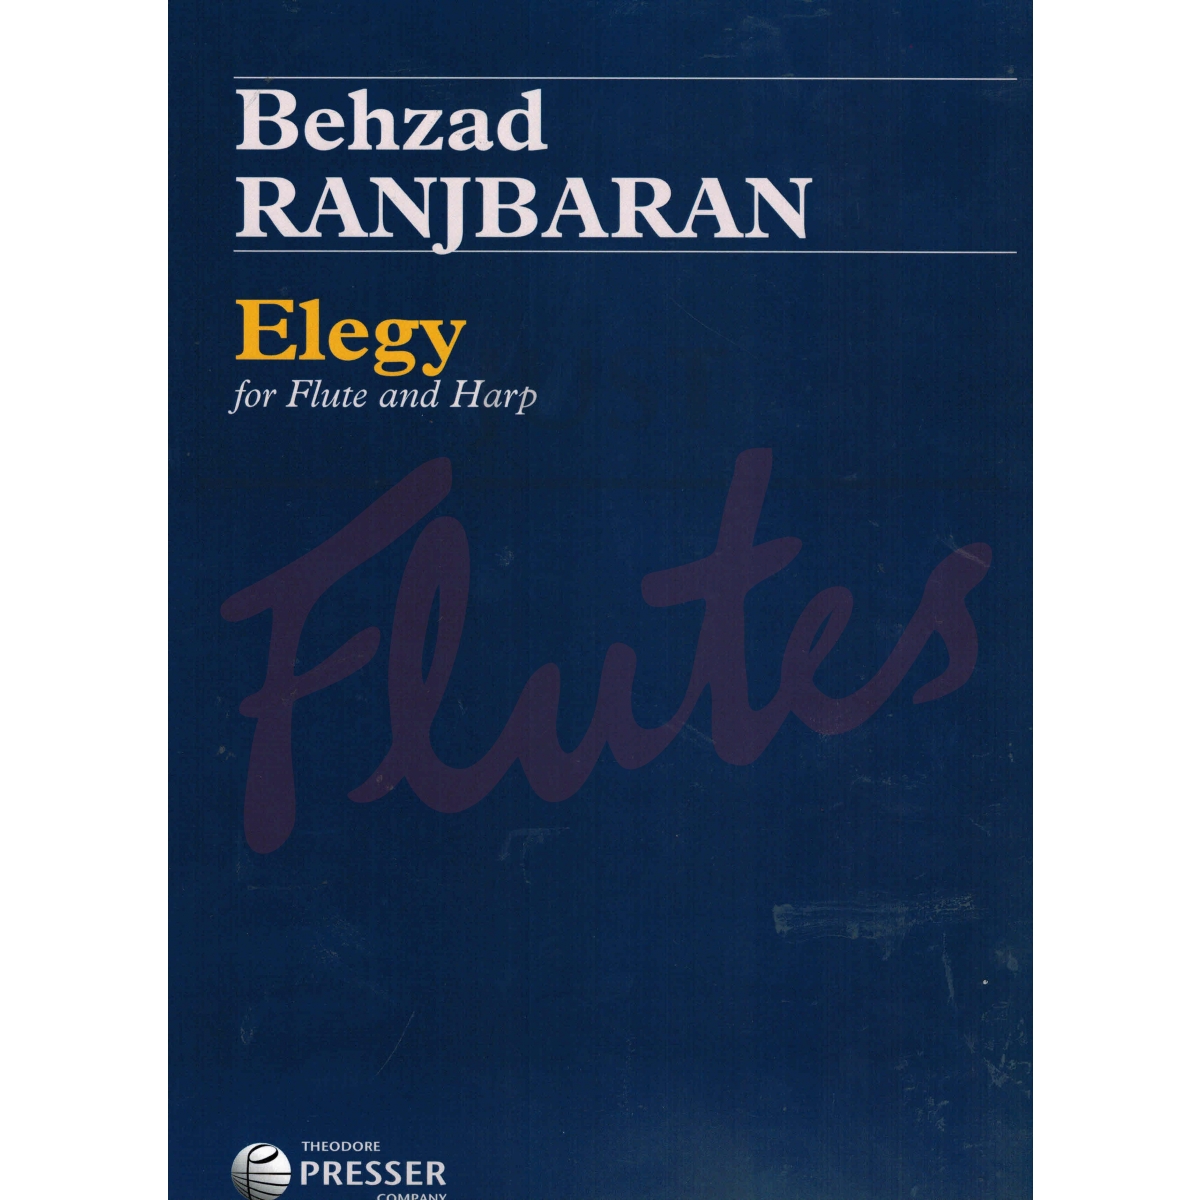 Elegy for Flute and Harp